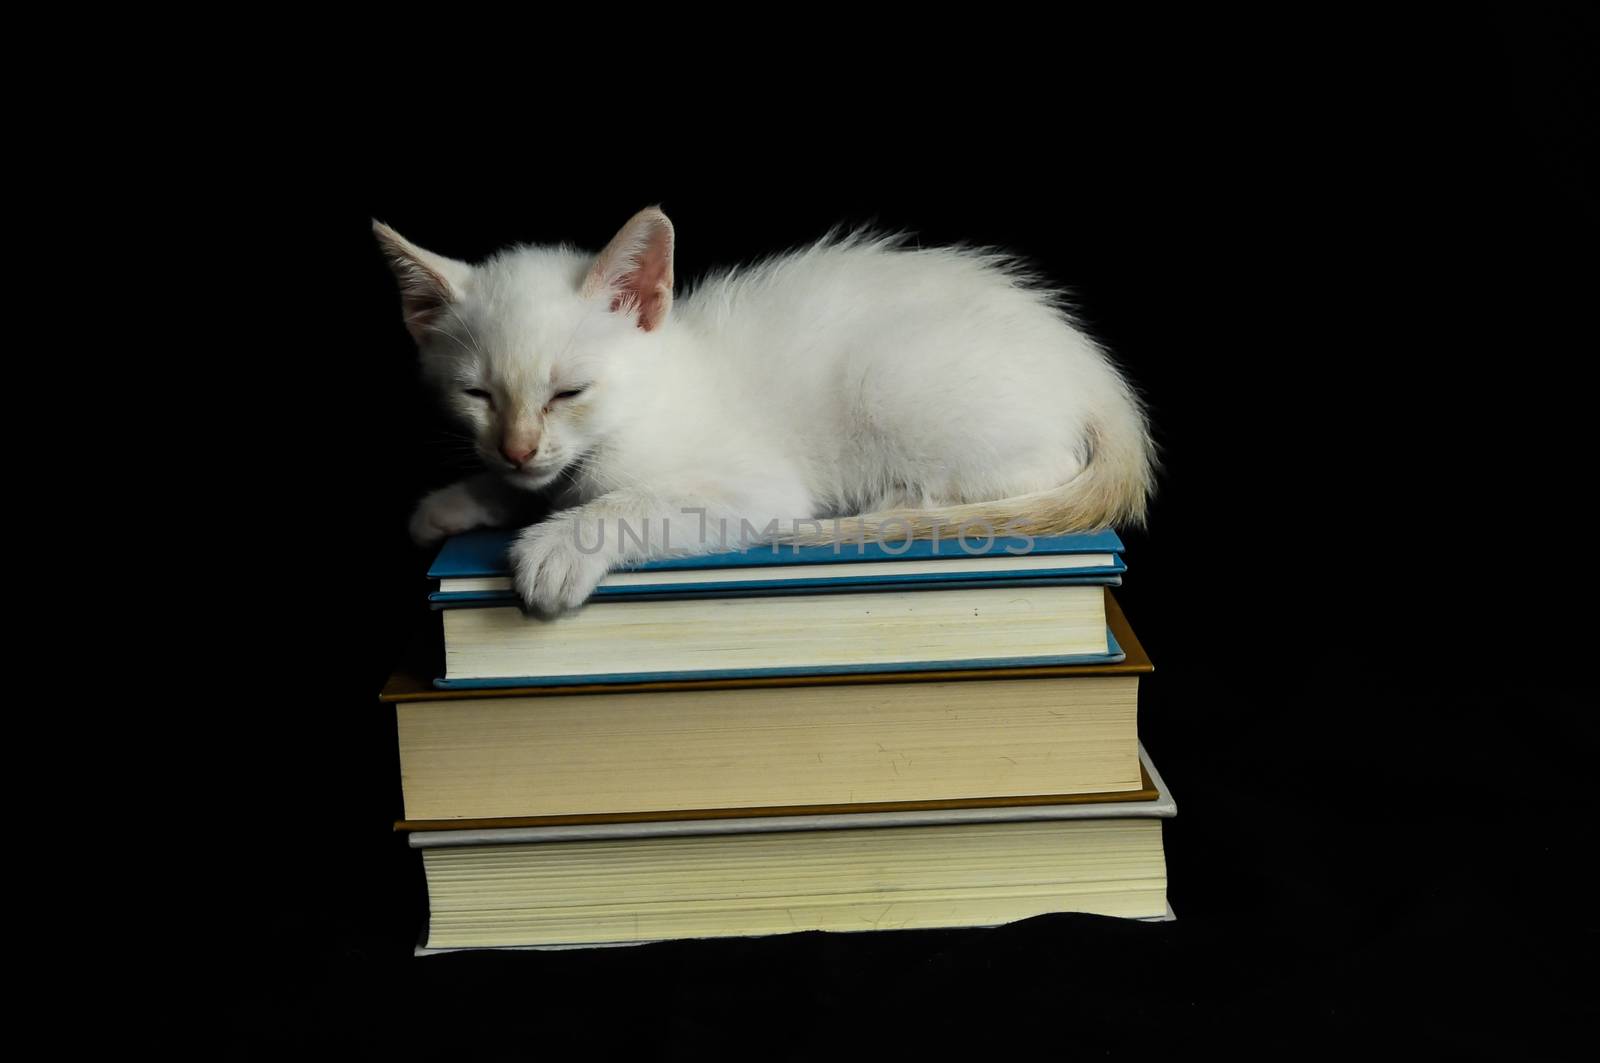 White Young Baby Cat on a Black Background